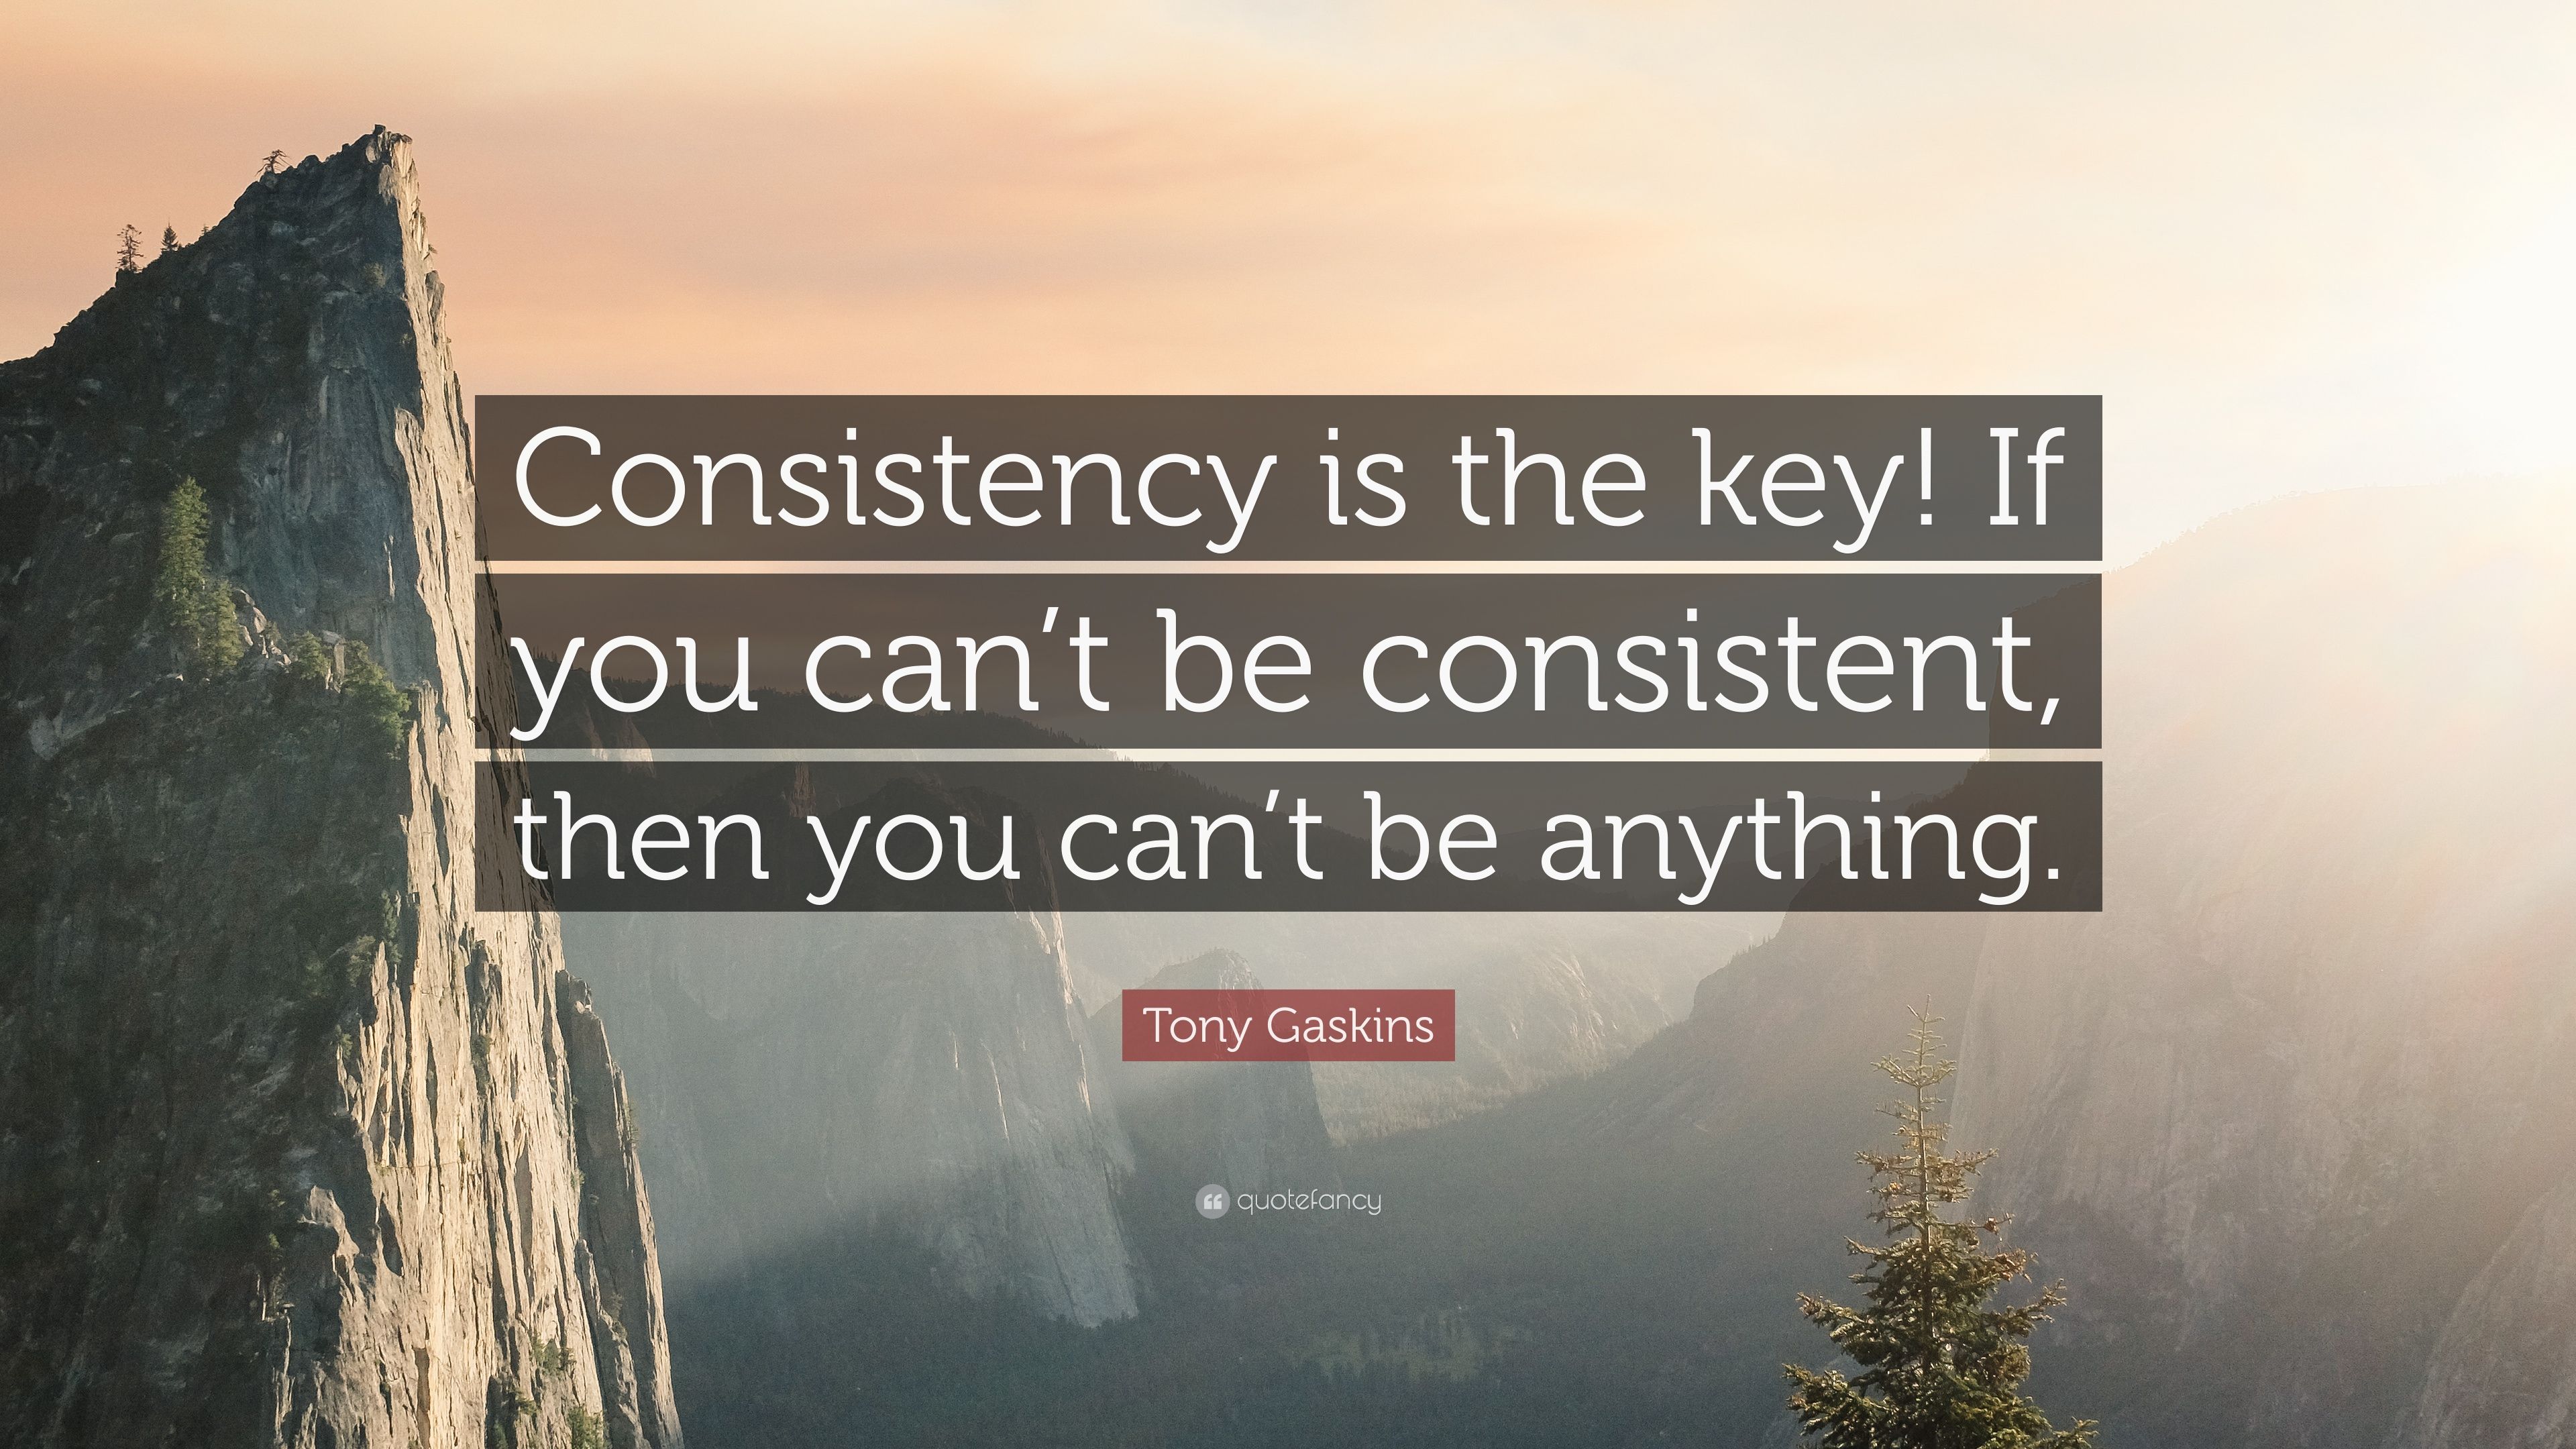 Tony Gaskins Quote: “Consistency is the key! If you can't be consistent, then you can't be anything.” (12 wallpaper)